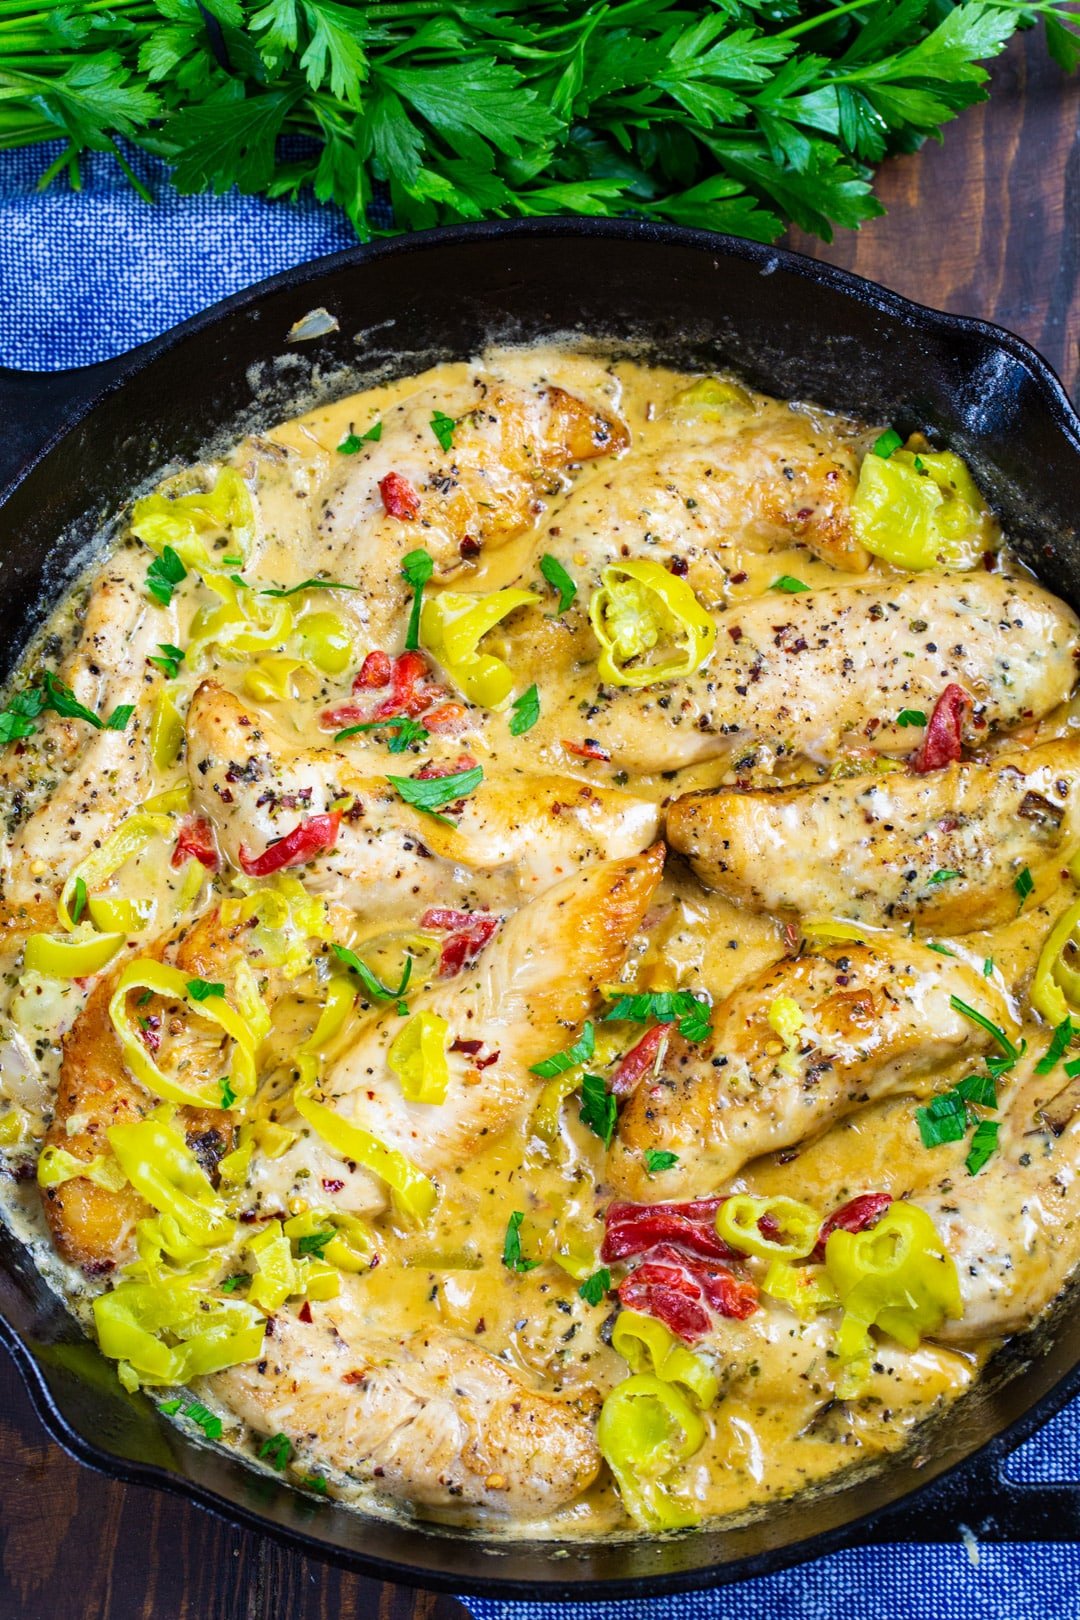 Finished chicken with pepperoncini peppers in a skillet.